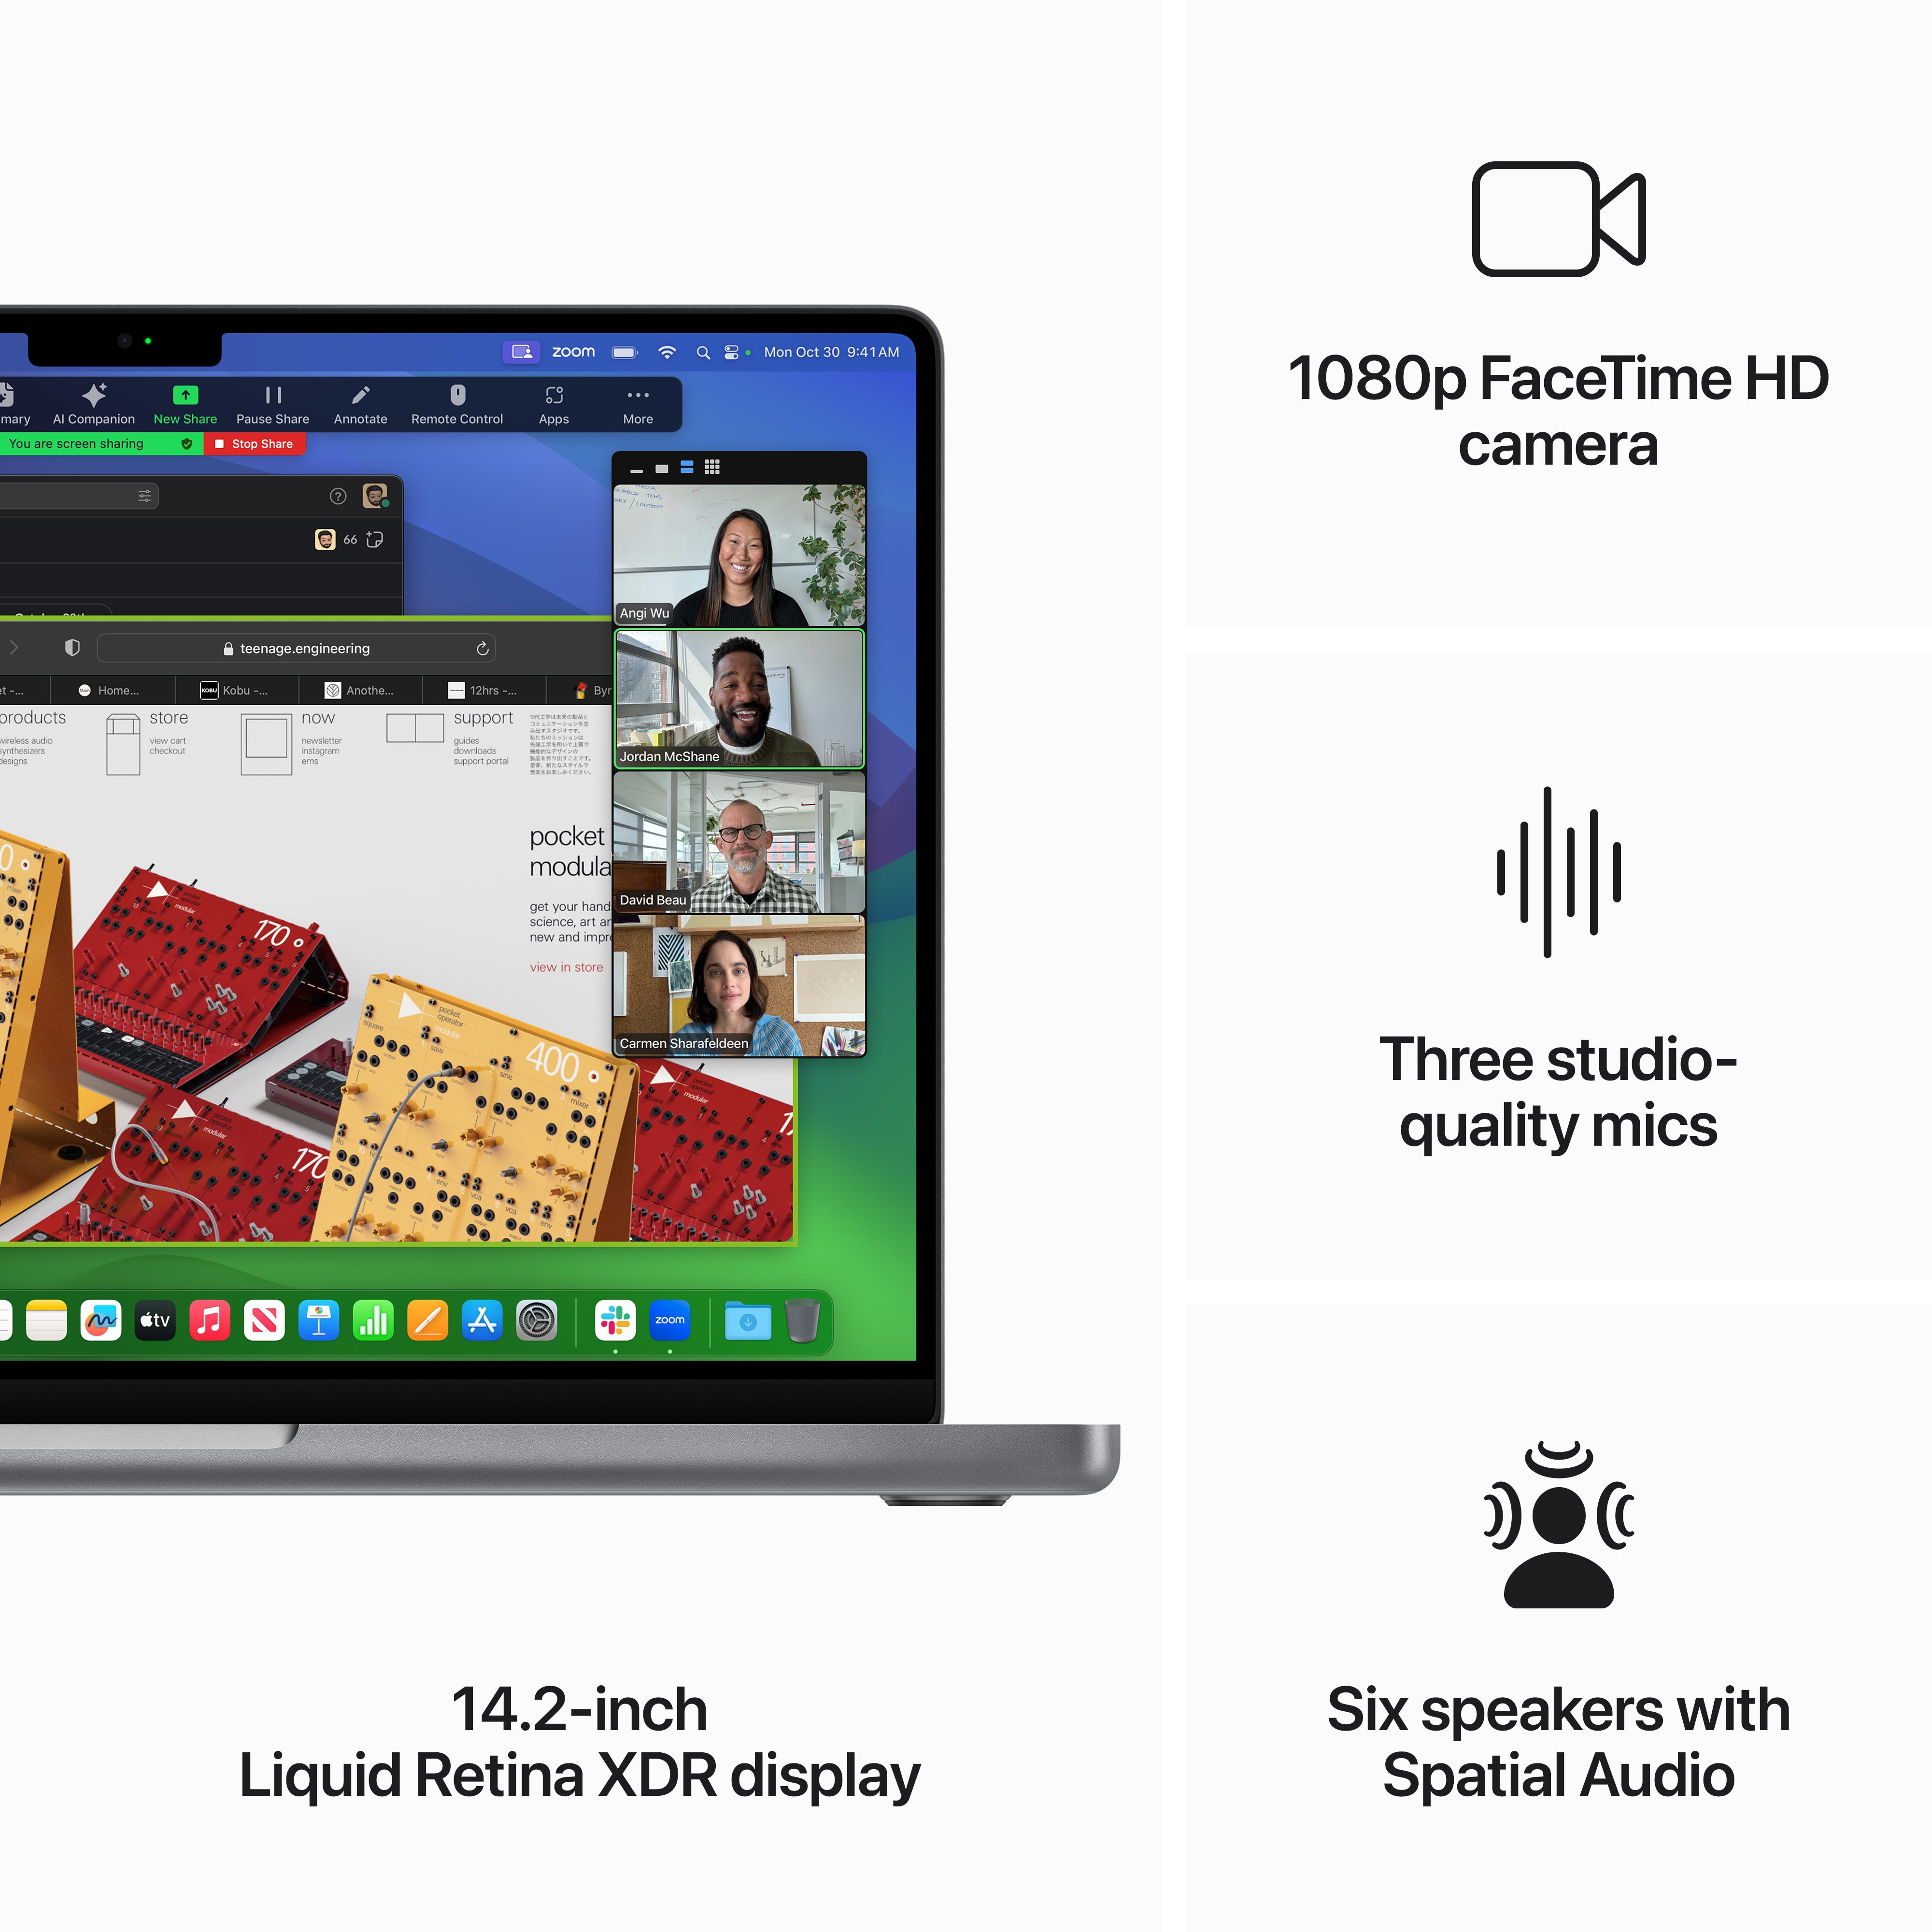 14-inch MacBook Pro: Apple M3 chip with 8C CPU and 10C GPU, 1TB SSD - Space Grey